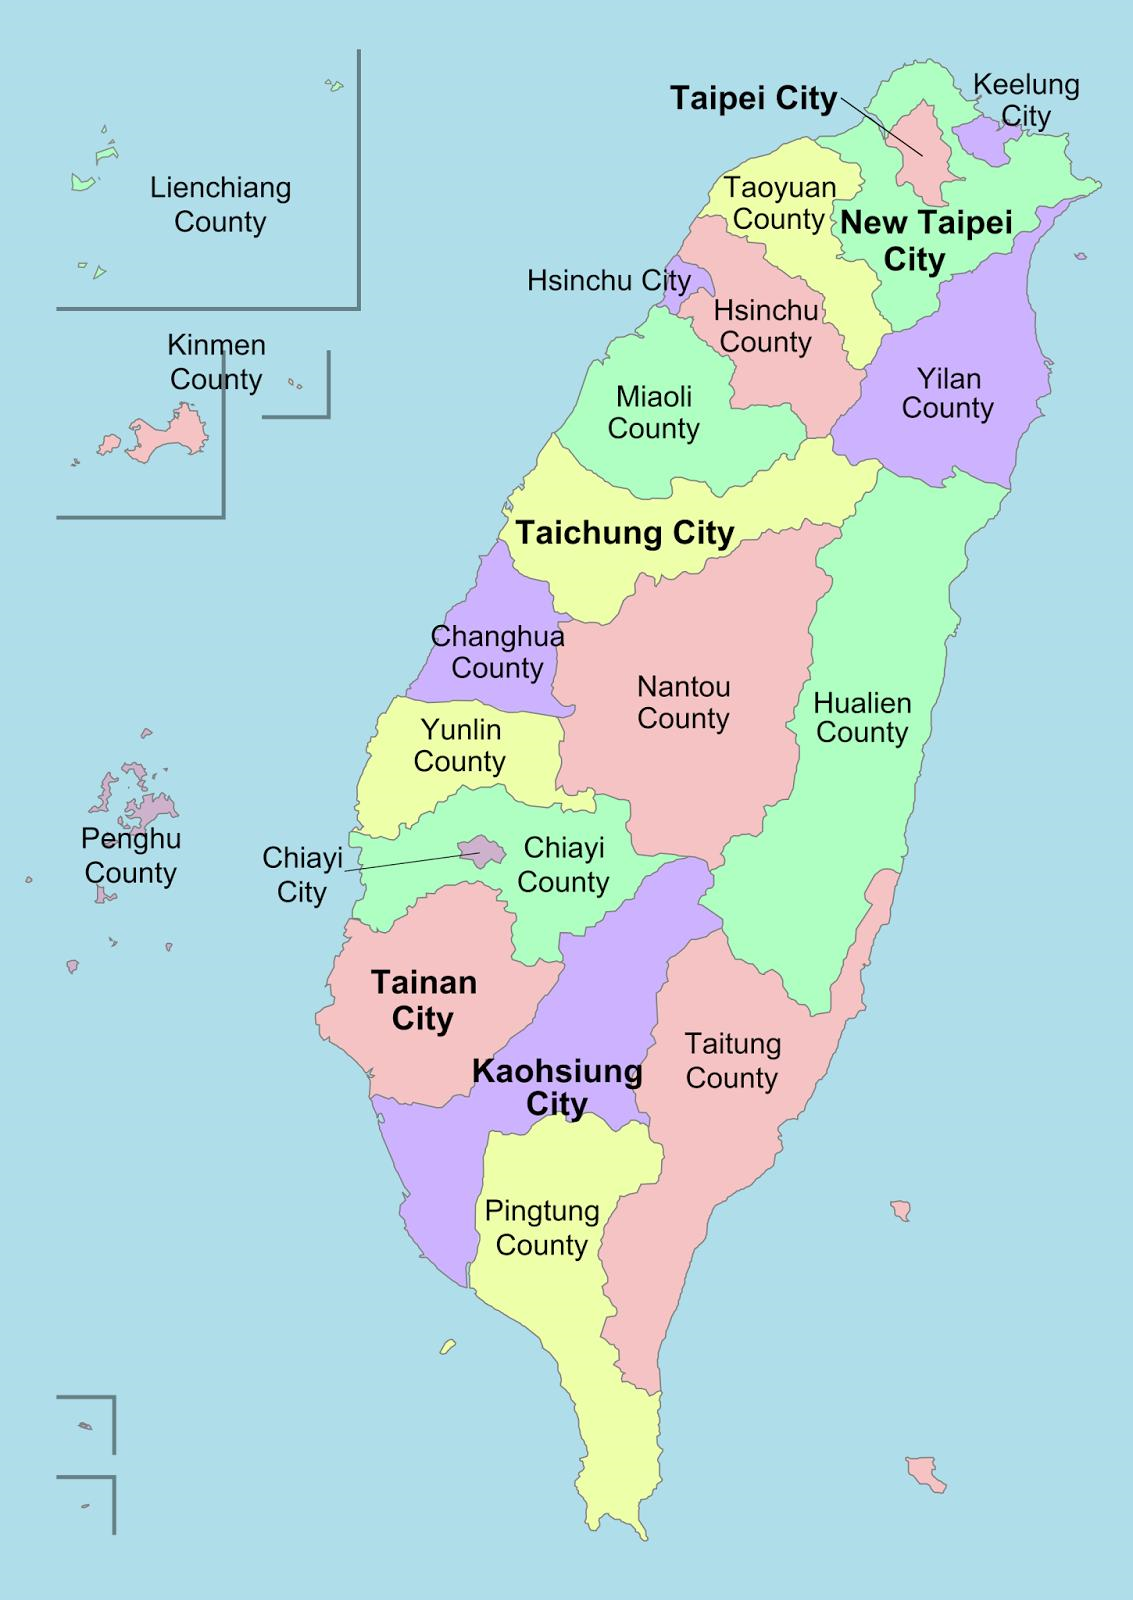 subdivision of Taiwan in counties